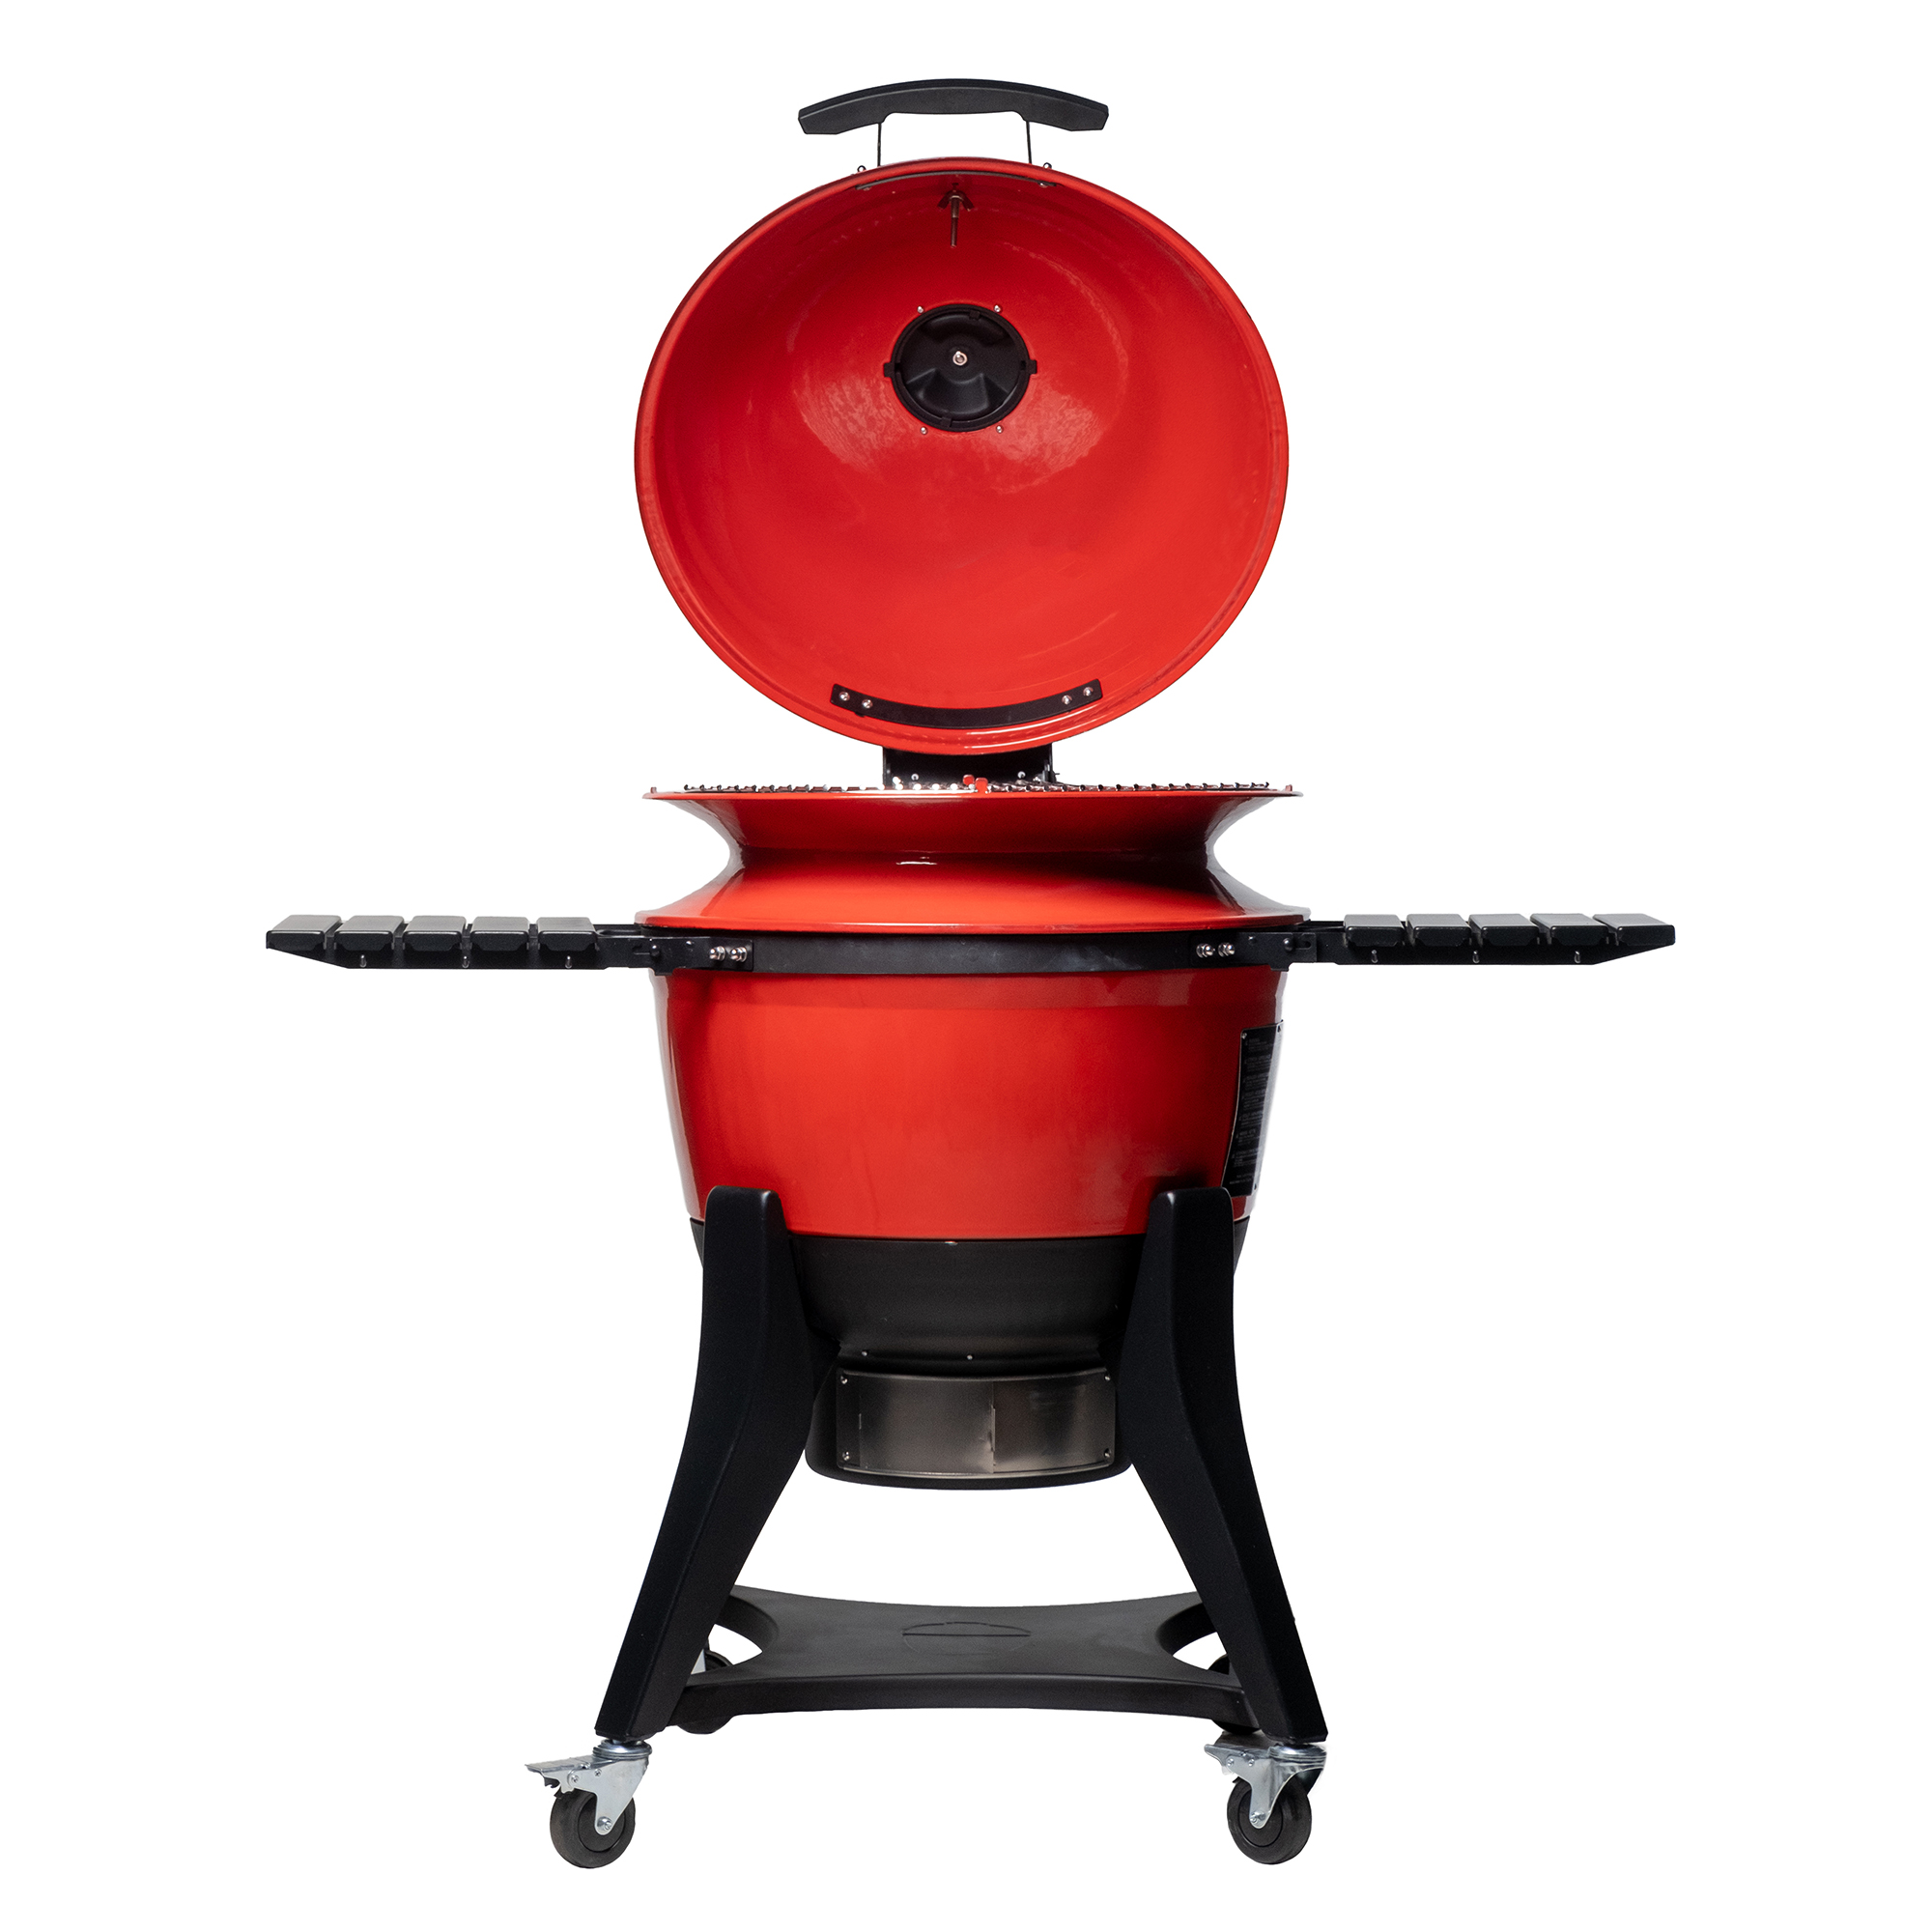 Kamado Joe Kettle Joe 22 in. Charcoal Grill in Red with Hinged Lid, Cart, and Side Shelves - image 2 of 12